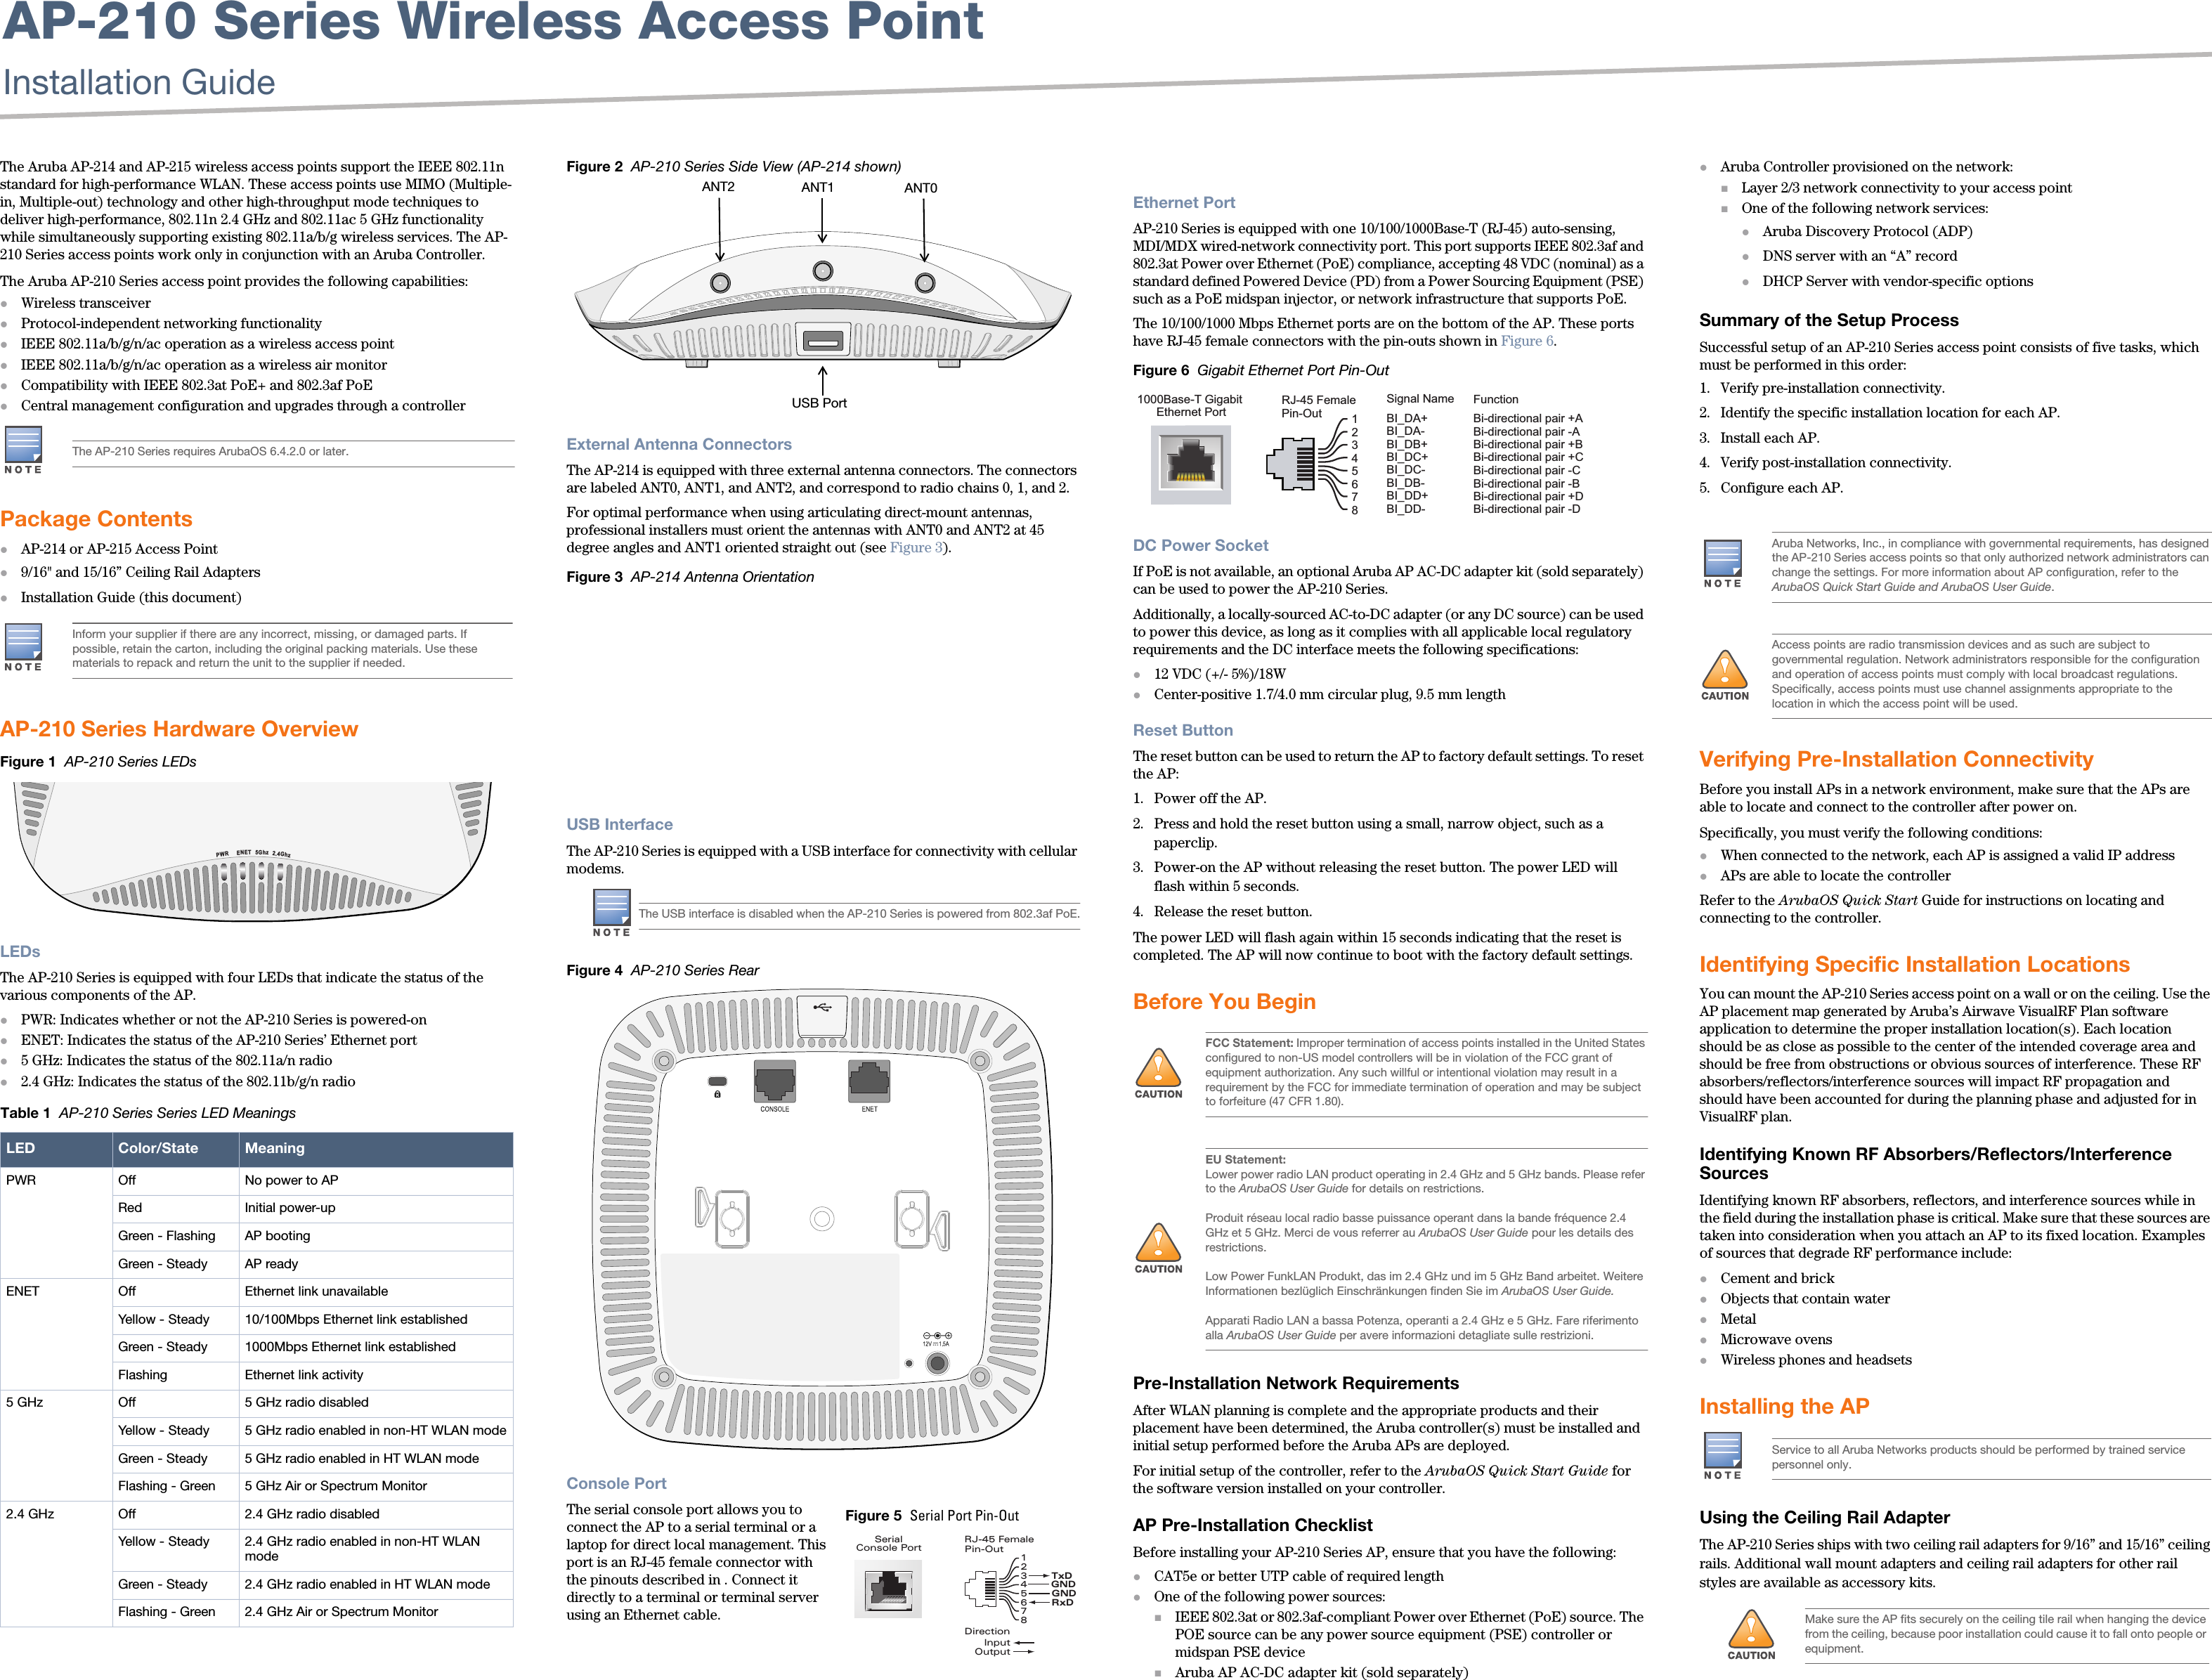 AP-210 Series Wireless Access PointInstallation Guide The Aruba AP-214 and AP-215 wireless access points support the IEEE 802.11n standard for high-performance WLAN. These access points use MIMO (Multiple-in, Multiple-out) technology and other high-throughput mode techniques to deliver high-performance, 802.11n 2.4 GHz and 802.11ac 5 GHz functionality while simultaneously supporting existing 802.11a/b/g wireless services. The AP-210 Series access points work only in conjunction with an Aruba Controller.The Aruba AP-210 Series access point provides the following capabilities:Wireless transceiverProtocol-independent networking functionalityIEEE 802.11a/b/g/n/ac operation as a wireless access pointIEEE 802.11a/b/g/n/ac operation as a wireless air monitorCompatibility with IEEE 802.3at PoE+ and 802.3af PoE Central management configuration and upgrades through a controllerPackage ContentsAP-214 or AP-215 Access Point 9/16&quot; and 15/16” Ceiling Rail AdaptersInstallation Guide (this document)AP-210 Series Hardware OverviewFigure 1  AP-210 Series LEDsLEDsThe AP-210 Series is equipped with four LEDs that indicate the status of the various components of the AP.PWR: Indicates whether or not the AP-210 Series is powered-onENET: Indicates the status of the AP-210 Series’ Ethernet port5 GHz: Indicates the status of the 802.11a/n radio2.4 GHz: Indicates the status of the 802.11b/g/n radioFigure 2  AP-210 Series Side View (AP-214 shown) External Antenna ConnectorsThe AP-214 is equipped with three external antenna connectors. The connectors are labeled ANT0, ANT1, and ANT2, and correspond to radio chains 0, 1, and 2. For optimal performance when using articulating direct-mount antennas, professional installers must orient the antennas with ANT0 and ANT2 at 45 degree angles and ANT1 oriented straight out (see Figure 3).Figure 3  AP-214 Antenna OrientationUSB InterfaceThe AP-210 Series is equipped with a USB interface for connectivity with cellular modems. Figure 4  AP-210 Series RearConsole PortThe serial console port allows you to connect the AP to a serial terminal or a laptop for direct local management. This port is an RJ-45 female connector with the pinouts described in . Connect it directly to a terminal or terminal server using an Ethernet cable.Ethernet PortAP-210 Series is equipped with one 10/100/1000Base-T (RJ-45) auto-sensing, MDI/MDX wired-network connectivity port. This port supports IEEE 802.3af and 802.3at Power over Ethernet (PoE) compliance, accepting 48 VDC (nominal) as a standard defined Powered Device (PD) from a Power Sourcing Equipment (PSE) such as a PoE midspan injector, or network infrastructure that supports PoE.The 10/100/1000 Mbps Ethernet ports are on the bottom of the AP. These ports have RJ-45 female connectors with the pin-outs shown in Figure 6.Figure 6  Gigabit Ethernet Port Pin-OutDC Power SocketIf PoE is not available, an optional Aruba AP AC-DC adapter kit (sold separately) can be used to power the AP-210 Series. Additionally, a locally-sourced AC-to-DC adapter (or any DC source) can be used to power this device, as long as it complies with all applicable local regulatory requirements and the DC interface meets the following specifications:12 VDC (+/- 5%)/18WCenter-positive 1.7/4.0 mm circular plug, 9.5 mm lengthReset ButtonThe reset button can be used to return the AP to factory default settings. To reset the AP:1. Power off the AP.2. Press and hold the reset button using a small, narrow object, such as a paperclip.3. Power-on the AP without releasing the reset button. The power LED will flash within 5 seconds.4. Release the reset button.The power LED will flash again within 15 seconds indicating that the reset is completed. The AP will now continue to boot with the factory default settings.Before You BeginPre-Installation Network RequirementsAfter WLAN planning is complete and the appropriate products and their placement have been determined, the Aruba controller(s) must be installed and initial setup performed before the Aruba APs are deployed.For initial setup of the controller, refer to the ArubaOS Quick Start Guide for the software version installed on your controller.AP Pre-Installation ChecklistBefore installing your AP-210 Series AP, ensure that you have the following:CAT5e or better UTP cable of required lengthOne of the following power sources:IEEE 802.3at or 802.3af-compliant Power over Ethernet (PoE) source. The POE source can be any power source equipment (PSE) controller or midspan PSE deviceAruba AP AC-DC adapter kit (sold separately)Aruba Controller provisioned on the network:Layer 2/3 network connectivity to your access pointOne of the following network services:Aruba Discovery Protocol (ADP)DNS server with an “A” recordDHCP Server with vendor-specific optionsSummary of the Setup ProcessSuccessful setup of an AP-210 Series access point consists of five tasks, which must be performed in this order:1. Verify pre-installation connectivity.2. Identify the specific installation location for each AP.3. Install each AP.4. Verify post-installation connectivity.5. Configure each AP.Verifying Pre-Installation ConnectivityBefore you install APs in a network environment, make sure that the APs are able to locate and connect to the controller after power on.Specifically, you must verify the following conditions:When connected to the network, each AP is assigned a valid IP addressAPs are able to locate the controller Refer to the ArubaOS Quick Start Guide for instructions on locating and connecting to the controller.Identifying Specific Installation LocationsYou can mount the AP-210 Series access point on a wall or on the ceiling. Use the AP placement map generated by Aruba’s Airwave VisualRF Plan software application to determine the proper installation location(s). Each location should be as close as possible to the center of the intended coverage area and should be free from obstructions or obvious sources of interference. These RF absorbers/reflectors/interference sources will impact RF propagation and should have been accounted for during the planning phase and adjusted for in VisualRF plan.Identifying Known RF Absorbers/Reflectors/Interference SourcesIdentifying known RF absorbers, reflectors, and interference sources while in the field during the installation phase is critical. Make sure that these sources are taken into consideration when you attach an AP to its fixed location. Examples of sources that degrade RF performance include:Cement and brickObjects that contain waterMetalMicrowave ovensWireless phones and headsetsInstalling the APUsing the Ceiling Rail AdapterThe AP-210 Series ships with two ceiling rail adapters for 9/16” and 15/16” ceiling rails. Additional wall mount adapters and ceiling rail adapters for other rail styles are available as accessory kits.The AP-210 Series requires ArubaOS 6.4.2.0 or later.Inform your supplier if there are any incorrect, missing, or damaged parts. If possible, retain the carton, including the original packing materials. Use these materials to repack and return the unit to the supplier if needed.Table 1  AP-210 Series Series LED MeaningsLED Color/State MeaningPWR Off No power to APRed Initial power-up Green - Flashing AP bootingGreen - Steady AP readyENET Off Ethernet link unavailableYellow - Steady 10/100Mbps Ethernet link establishedGreen - Steady 1000Mbps Ethernet link establishedFlashing Ethernet link activity5 GHz Off 5 GHz radio disabledYellow - Steady 5 GHz radio enabled in non-HT WLAN modeGreen - Steady 5 GHz radio enabled in HT WLAN modeFlashing - Green  5 GHz Air or Spectrum Monitor2.4 GHz Off 2.4 GHz radio disabledYellow - Steady 2.4 GHz radio enabled in non-HT WLAN modeGreen - Steady 2.4 GHz radio enabled in HT WLAN modeFlashing - Green  2.4 GHz Air or Spectrum Monitor2.4Ghz5GhzENETPWRThe USB interface is disabled when the AP-210 Series is powered from 802.3af PoE.ANT2 ANT0ANT1USB PortFigure 5  Serial Port Pin-OutSerialConsole Port12345678TxDGNDRxDRJ-45 FemalePin-OutDirectionInputOutputGND!FCC Statement: Improper termination of access points installed in the United States configured to non-US model controllers will be in violation of the FCC grant of equipment authorization. Any such willful or intentional violation may result in a requirement by the FCC for immediate termination of operation and may be subject to forfeiture (47 CFR 1.80).!EU Statement: Lower power radio LAN product operating in 2.4 GHz and 5 GHz bands. Please refer to the ArubaOS User Guide for details on restrictions.Produit réseau local radio basse puissance operant dans la bande fréquence 2.4 GHz et 5 GHz. Merci de vous referrer au ArubaOS User Guide pour les details des restrictions.Low Power FunkLAN Produkt, das im 2.4 GHz und im 5 GHz Band arbeitet. Weitere Informationen bezlüglich Einschränkungen finden Sie im ArubaOS User Guide.Apparati Radio LAN a bassa Potenza, operanti a 2.4 GHz e 5 GHz. Fare riferimento alla ArubaOS User Guide per avere informazioni detagliate sulle restrizioni.1000Base-T Gigabit Ethernet PortRJ-45 FemalePin-OutSignal Name12345678BI_DC+BI_DC-BI_DD+BI_DD-BI_DA+BI_DA-BI_DB+BI_DB-FunctionBi-directional pair +CBi-directional pair -CBi-directional pair +DBi-directional pair -DBi-directional pair +ABi-directional pair -ABi-directional pair +BBi-directional pair -B     Aruba Networks, Inc., in compliance with governmental requirements, has designed the AP-210 Series access points so that only authorized network administrators can change the settings. For more information about AP configuration, refer to the ArubaOS Quick Start Guide and ArubaOS User Guide.!Access points are radio transmission devices and as such are subject to governmental regulation. Network administrators responsible for the configuration and operation of access points must comply with local broadcast regulations. Specifically, access points must use channel assignments appropriate to the location in which the access point will be used.Service to all Aruba Networks products should be performed by trained service personnel only.!Make sure the AP fits securely on the ceiling tile rail when hanging the device from the ceiling, because poor installation could cause it to fall onto people or equipment.